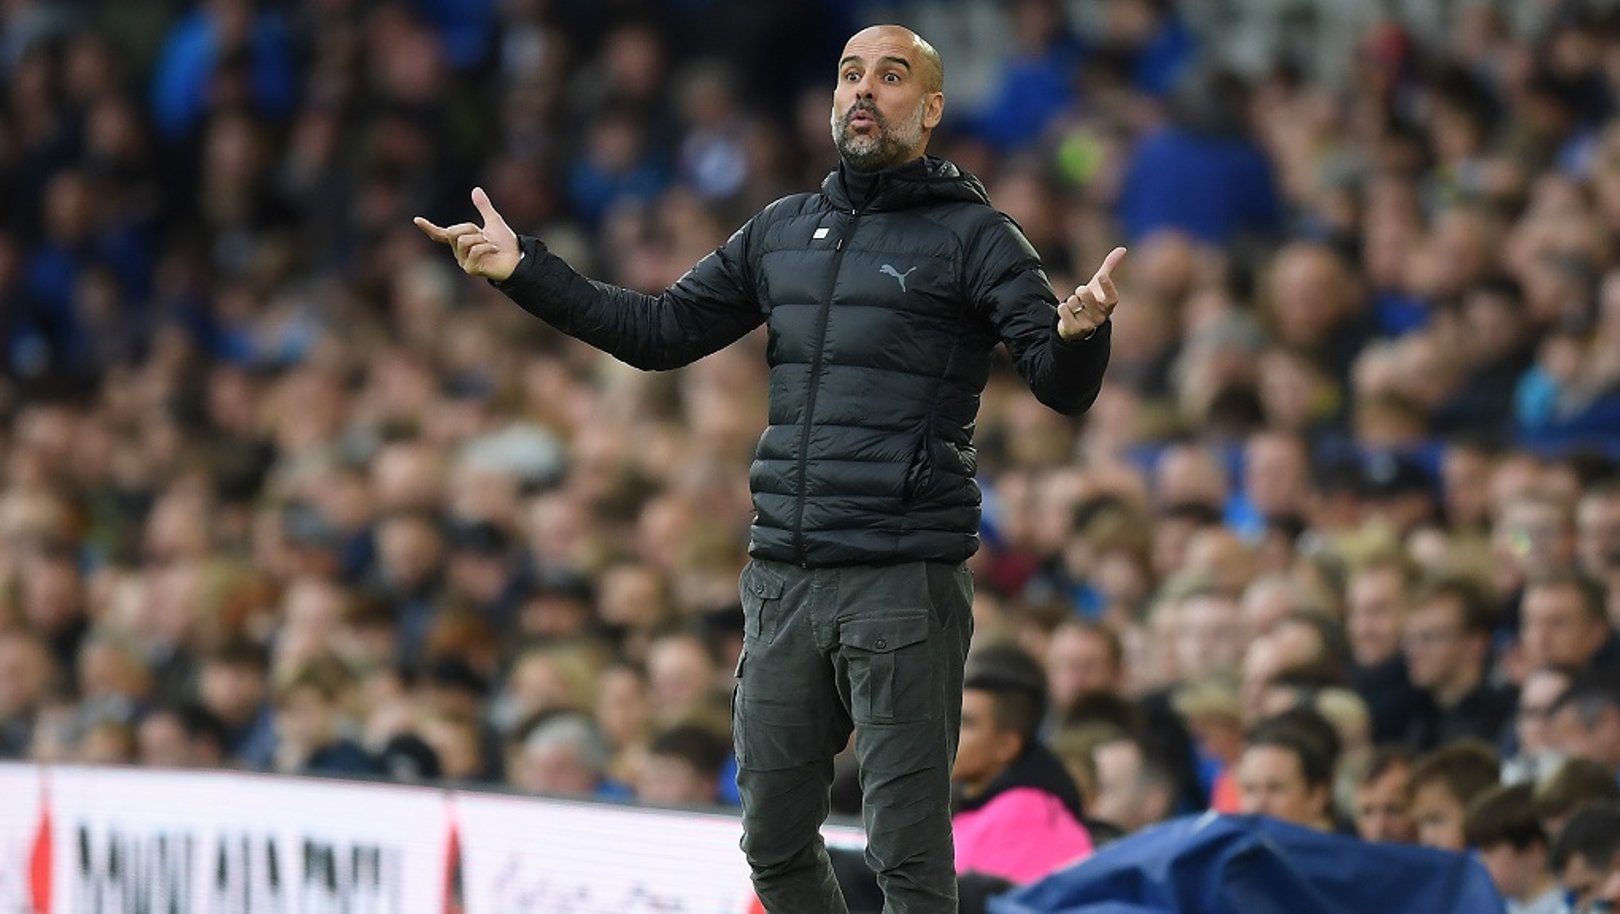 PEP: The boss asks a question...